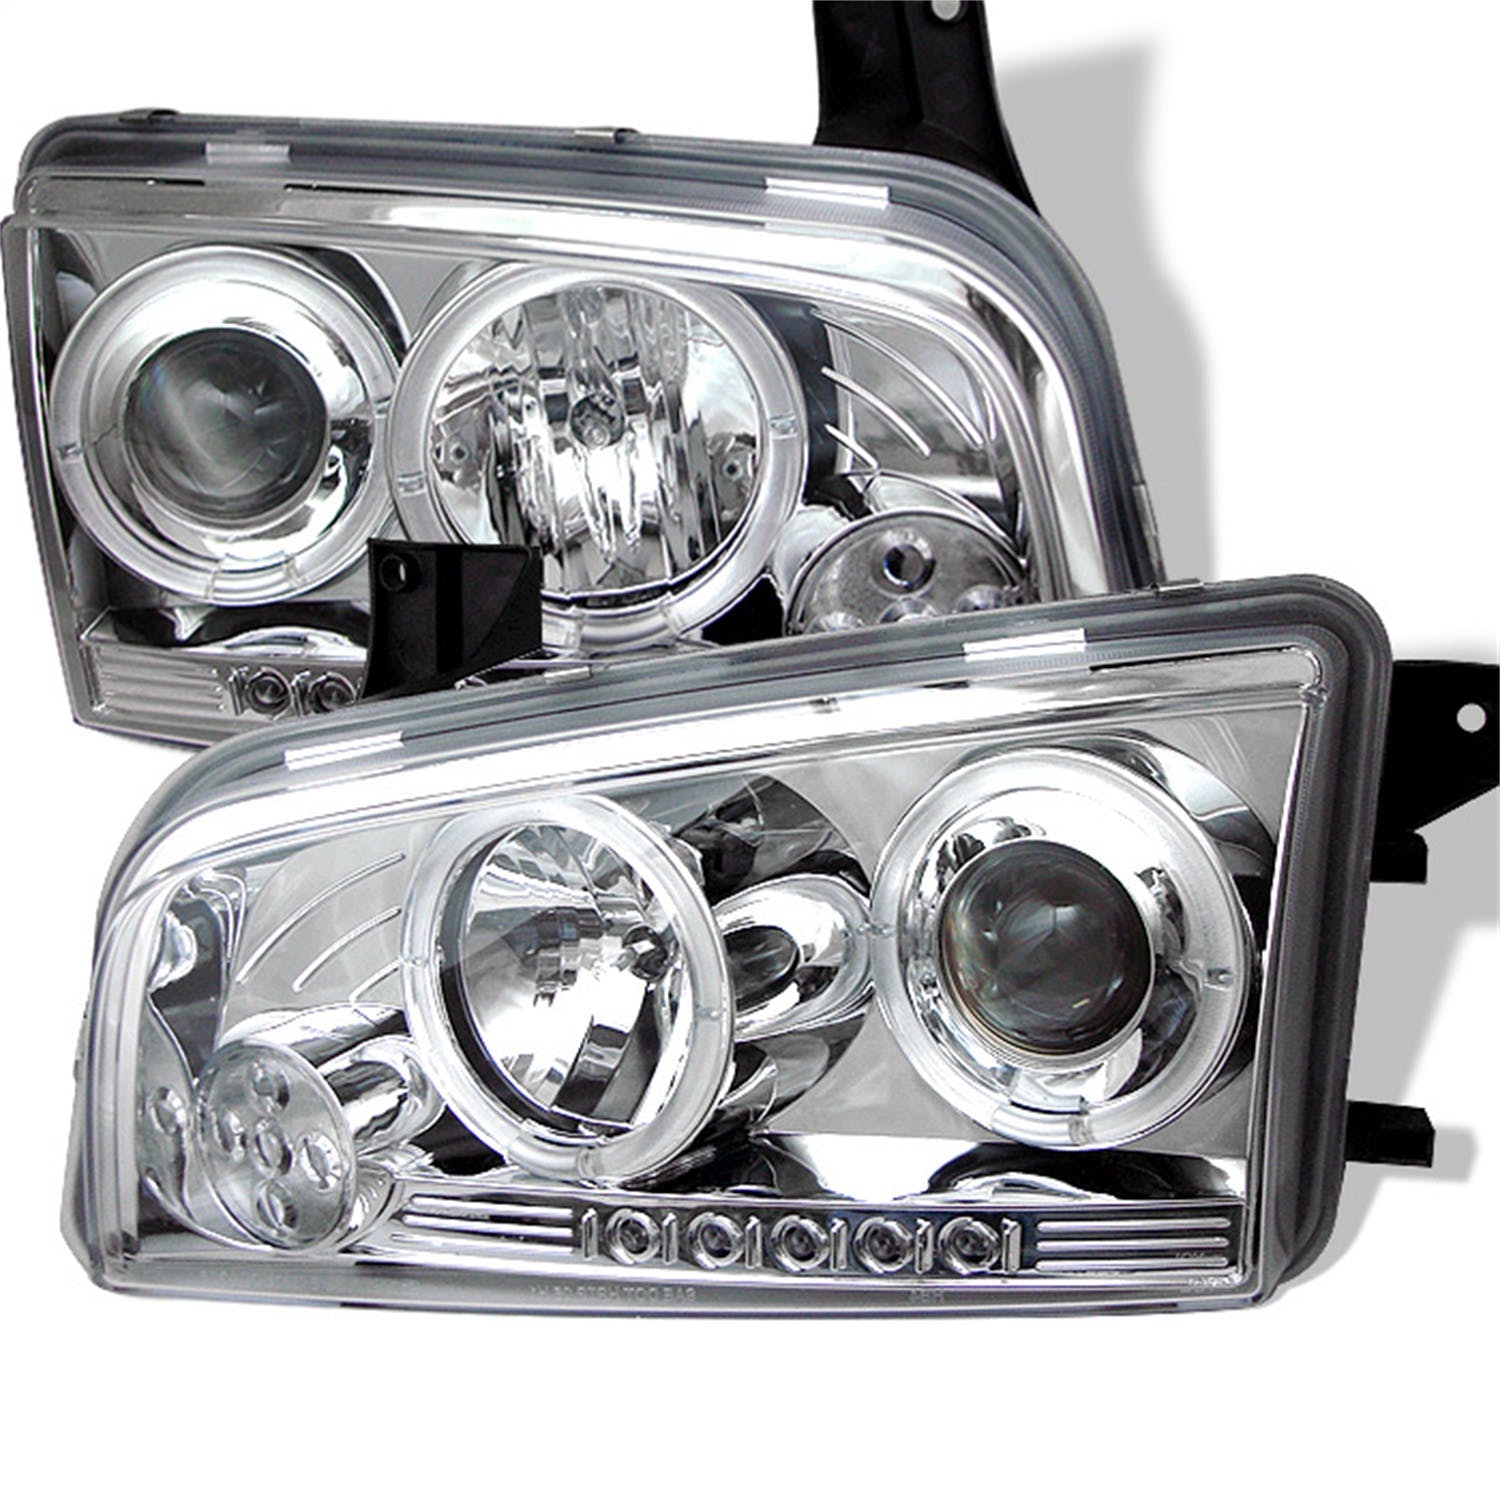 Spyder Auto 5009746 (Spyder) Dodge Charger 06-10 Projector Headlights-Halogen Model Only ( Not Compa